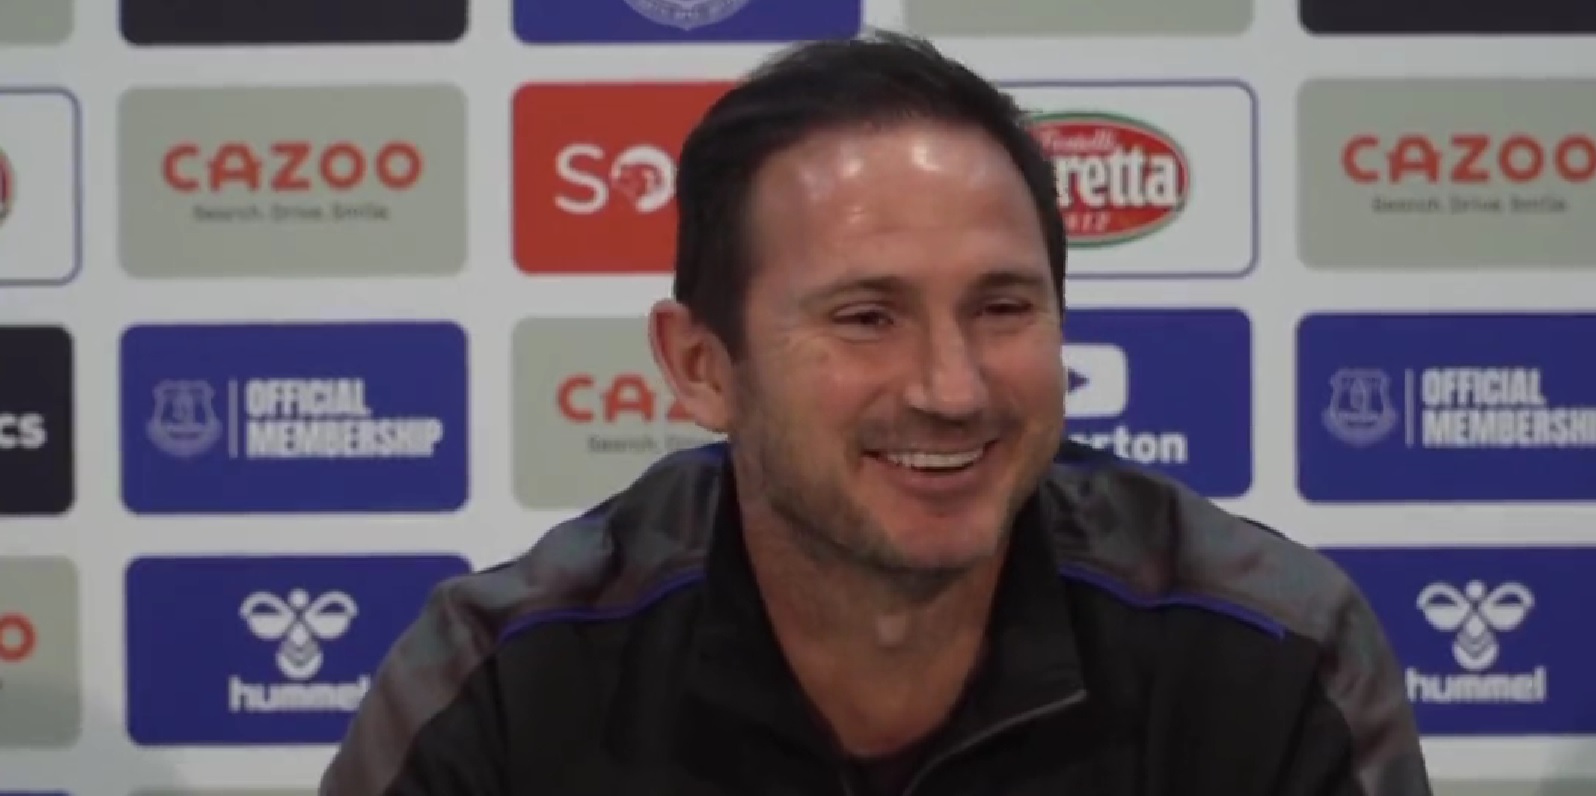 (Video) Frank Lampard shares what he thinks about Liverpool ahead of first Merseyside derby: ‘We have two of them in the Premier League’